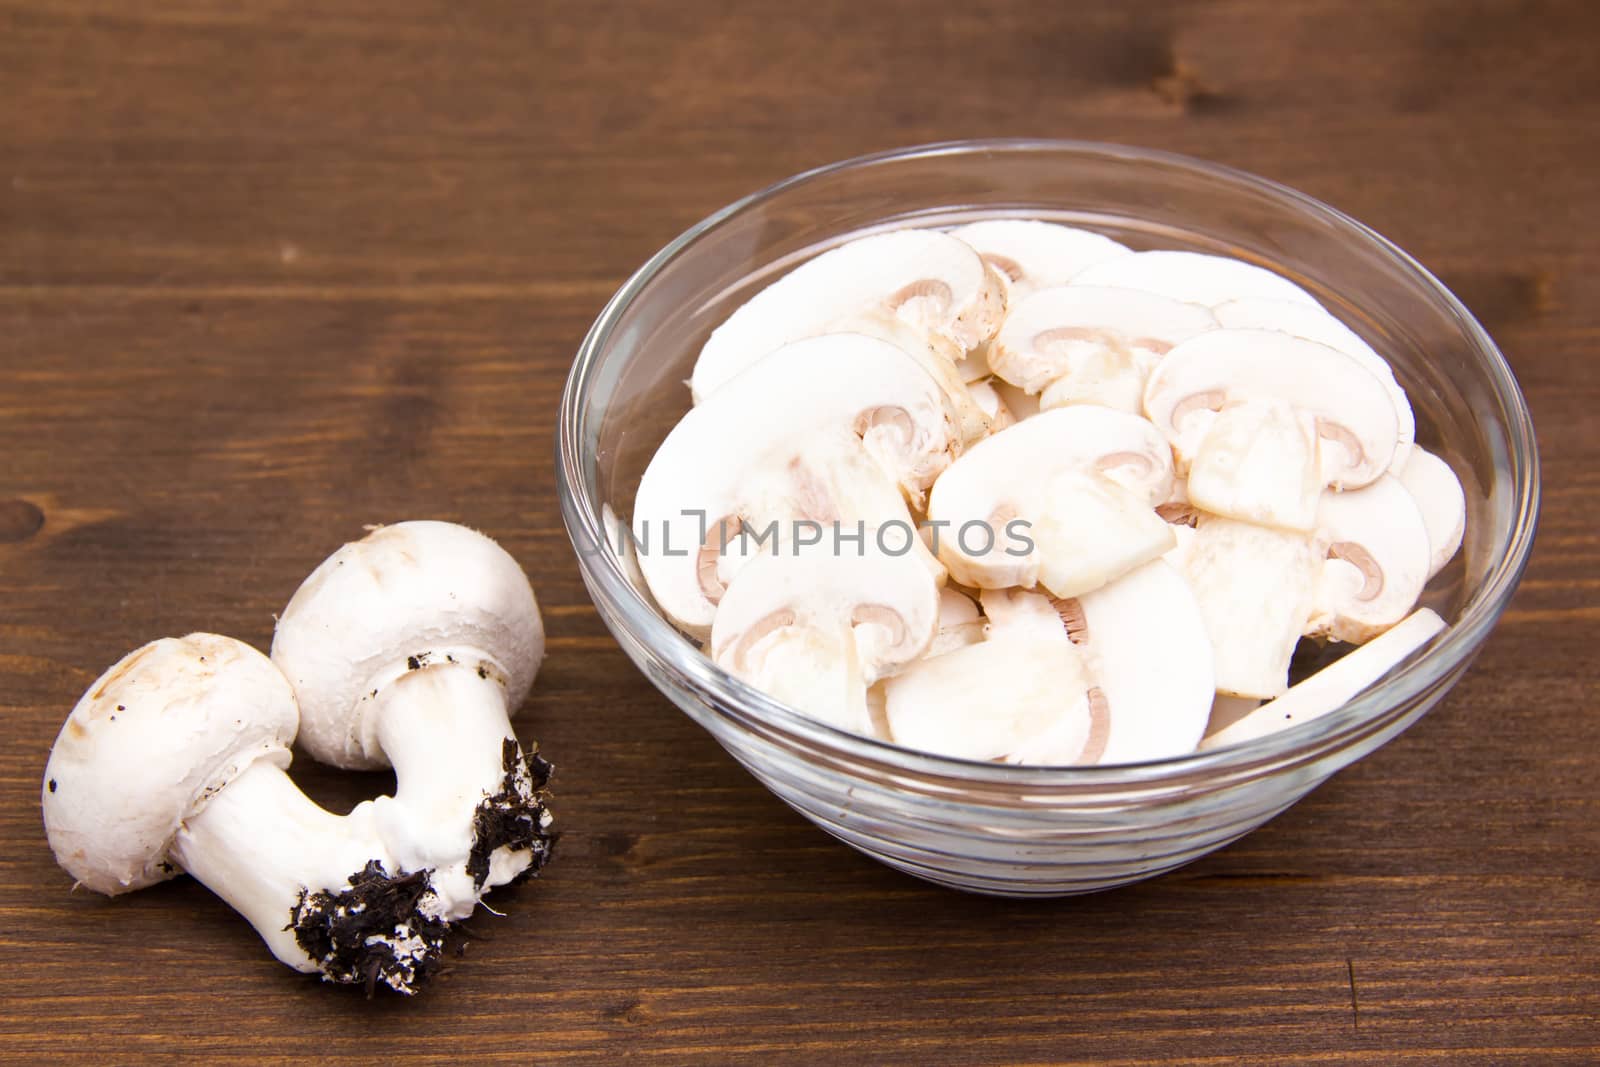 Sliced mushrooms in bowl on wooden table